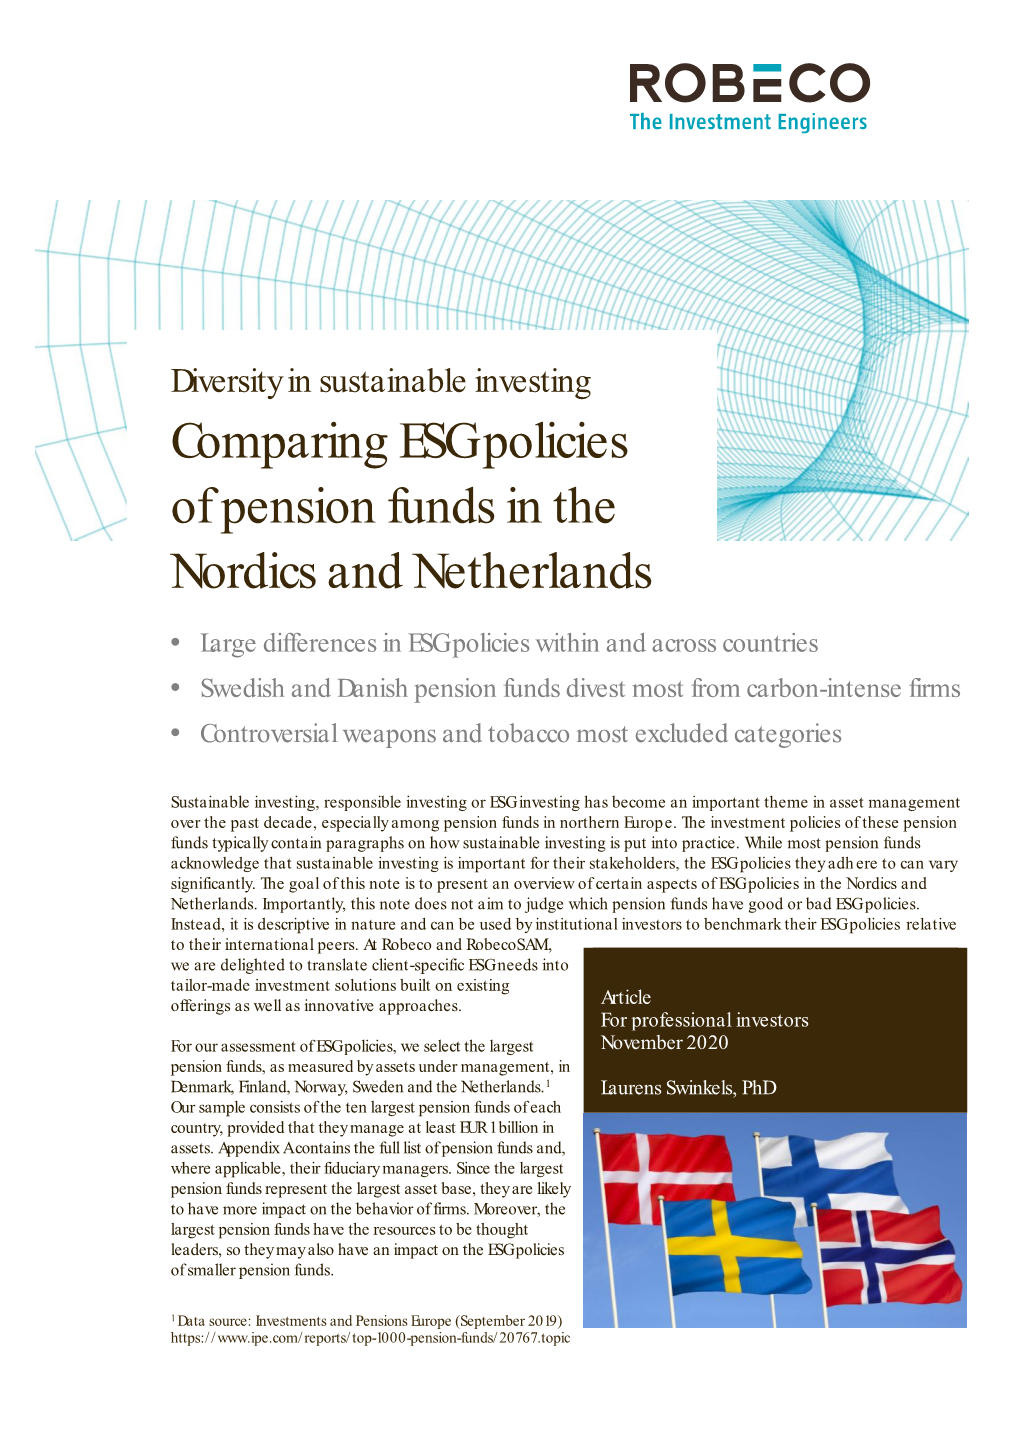 Comparing ESG Policies of Pension Funds in the Nordics and Netherlands